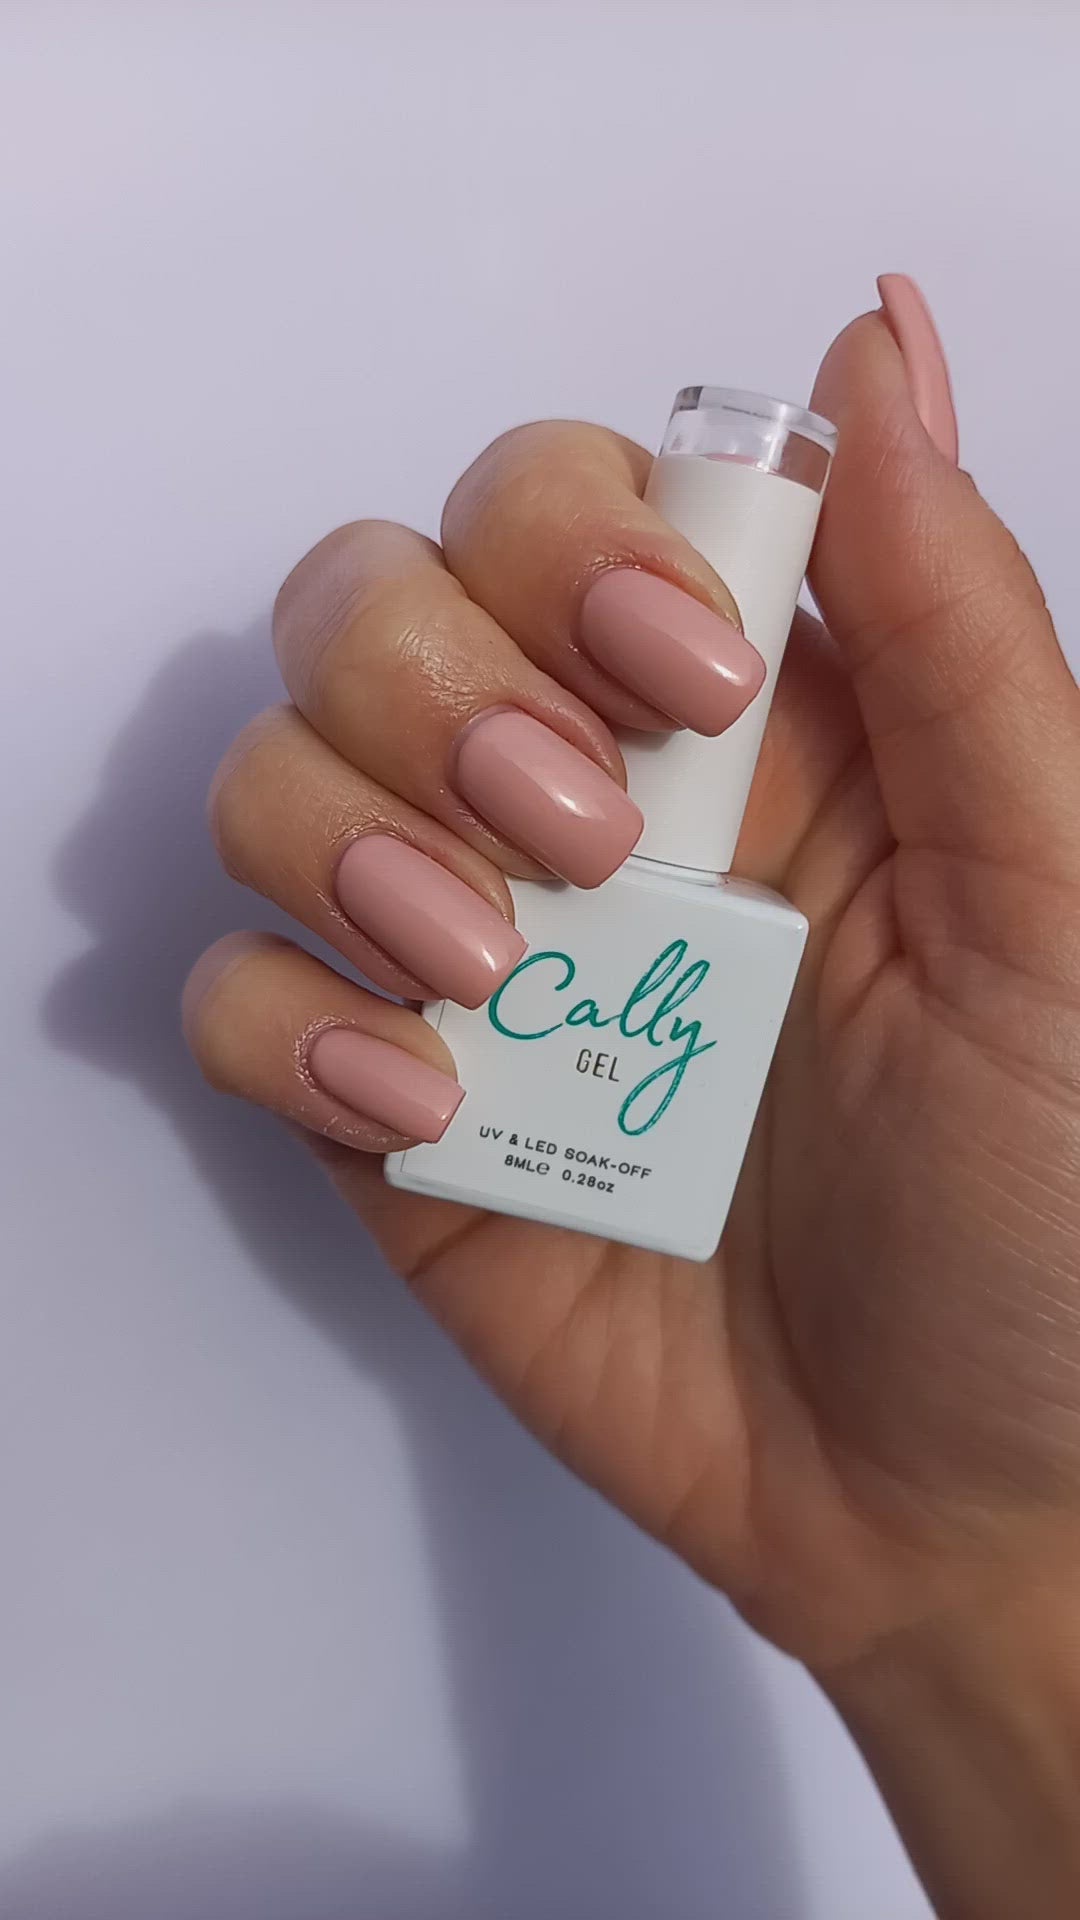 Showing Hand Manicured with Ballet Slippers Cally Gel Nail Polish and Bottle in Hand